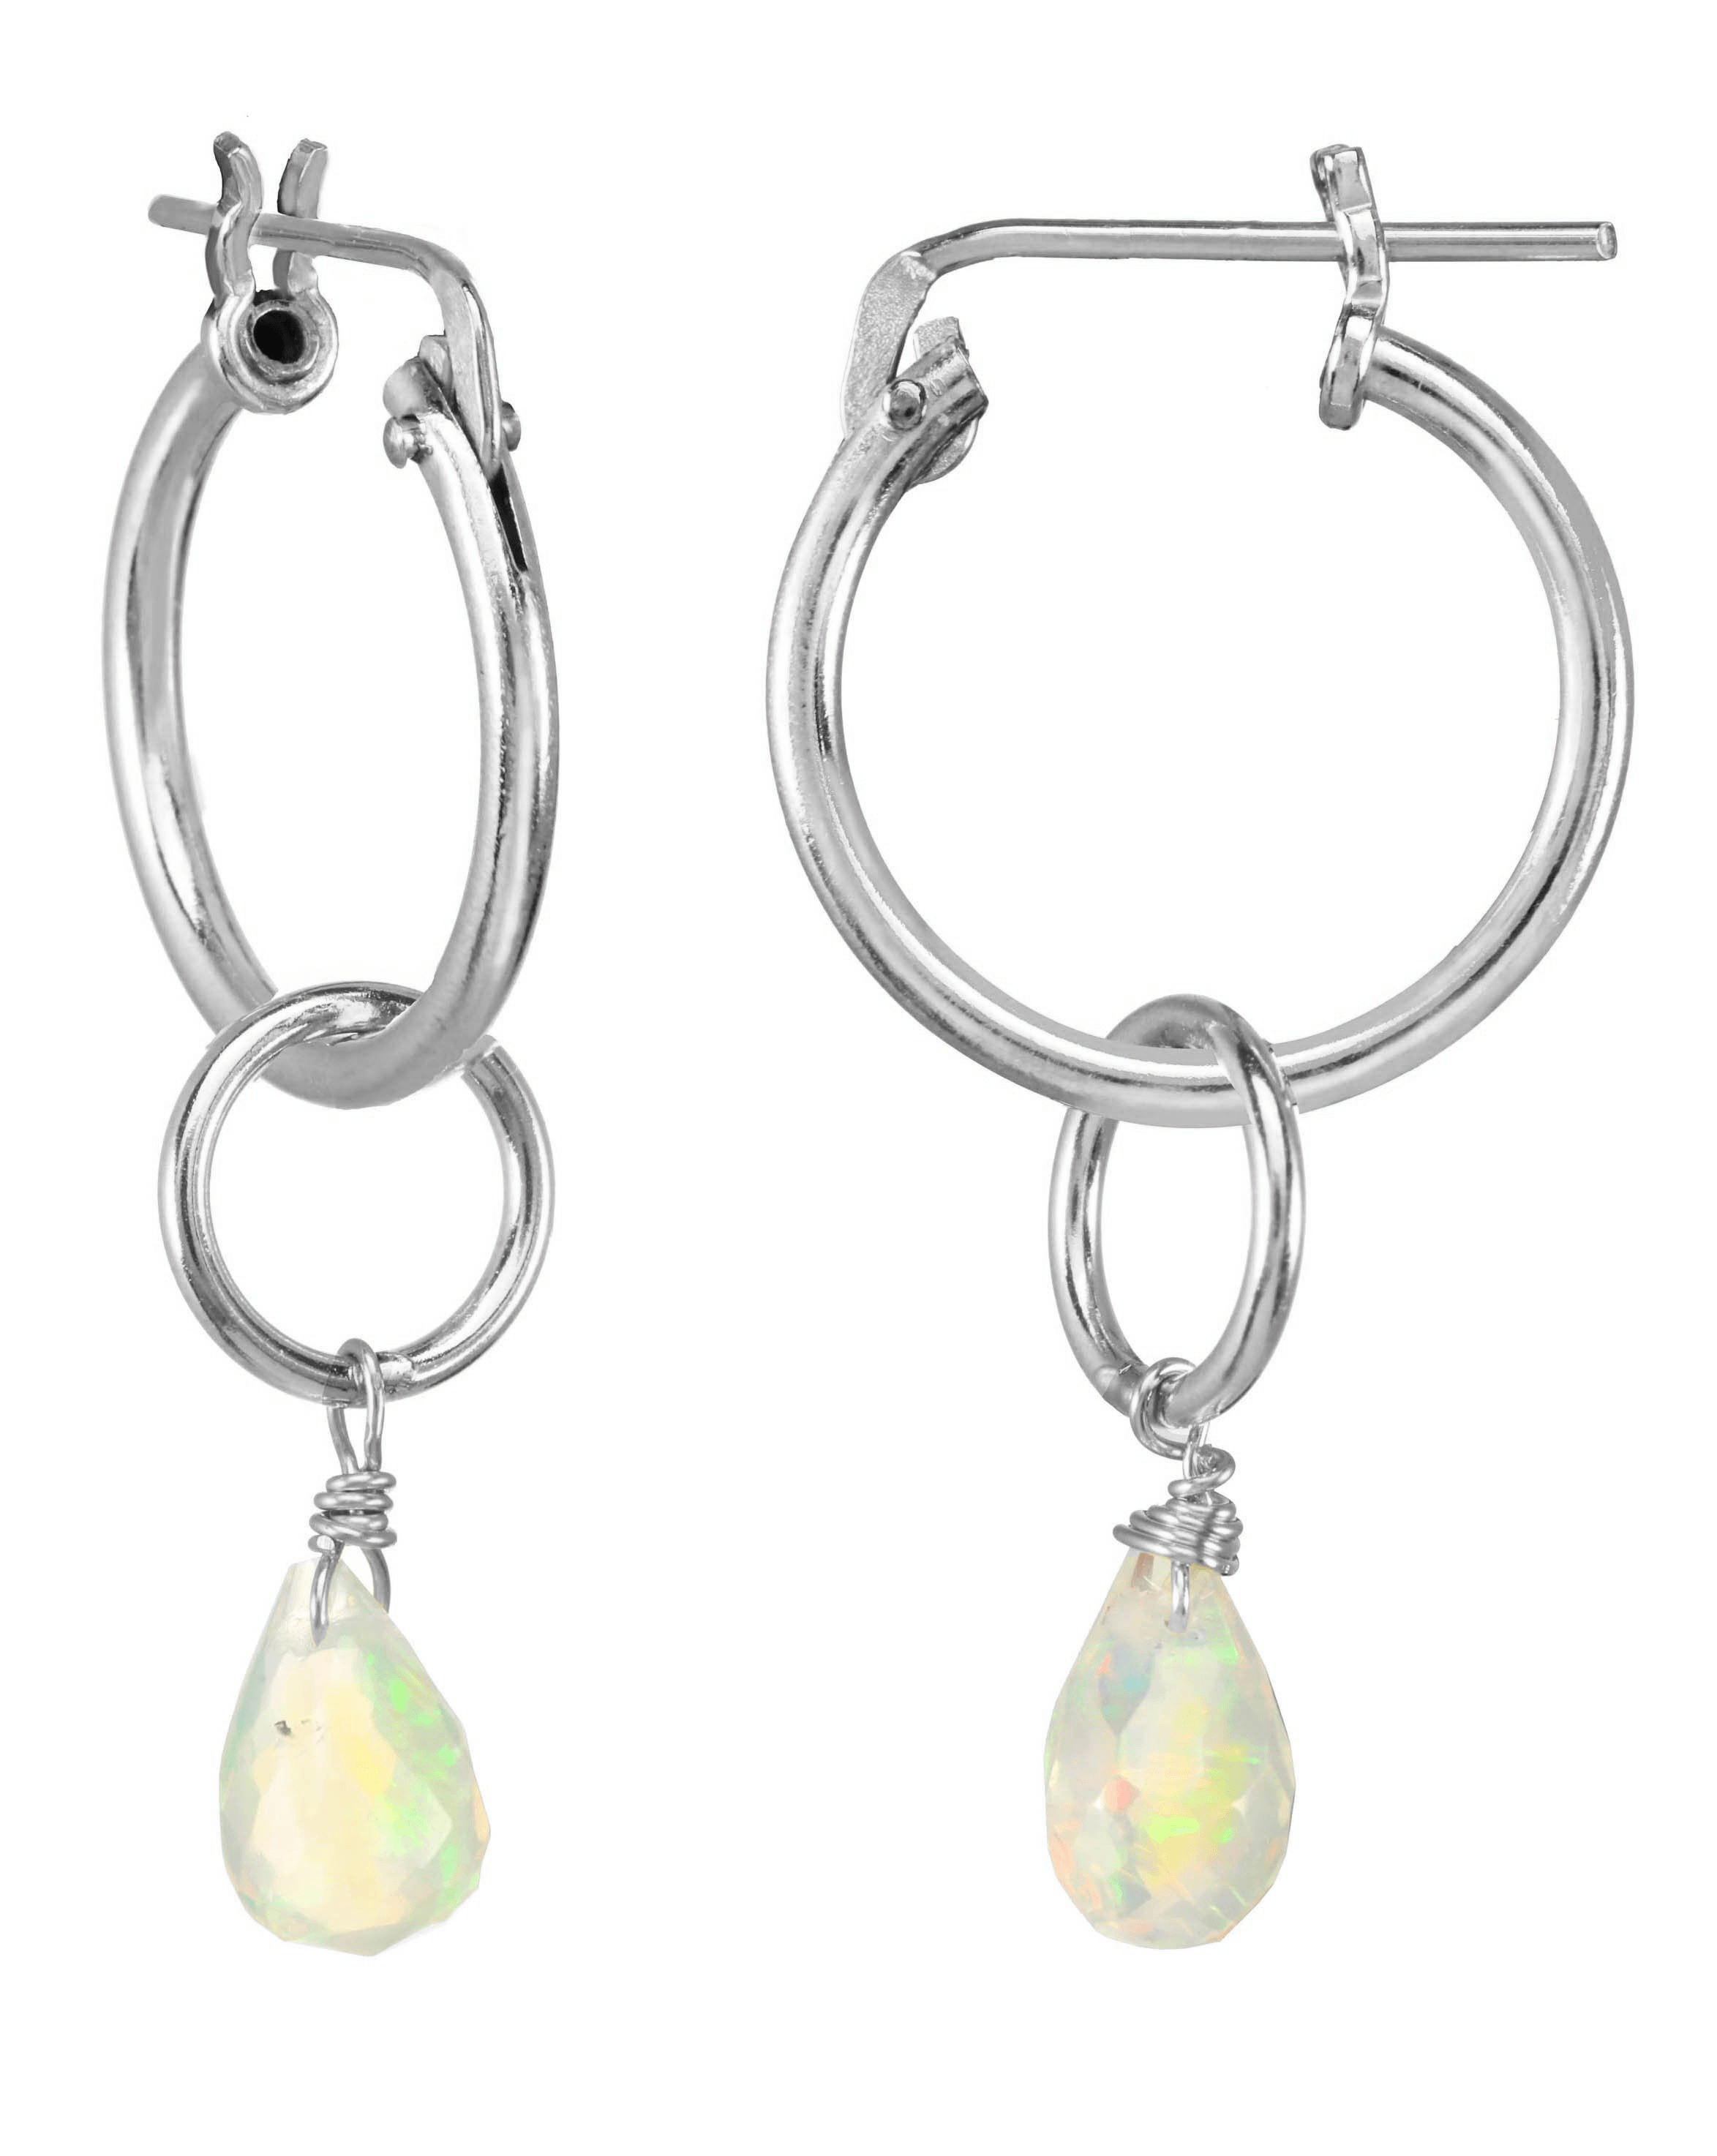 Olivia Earrings by KOZAKH. 15mm snap closure hoop earrings in Sterling Silver, featuring a 5mm to 7mm Ethiopian Opal faceted droplet.